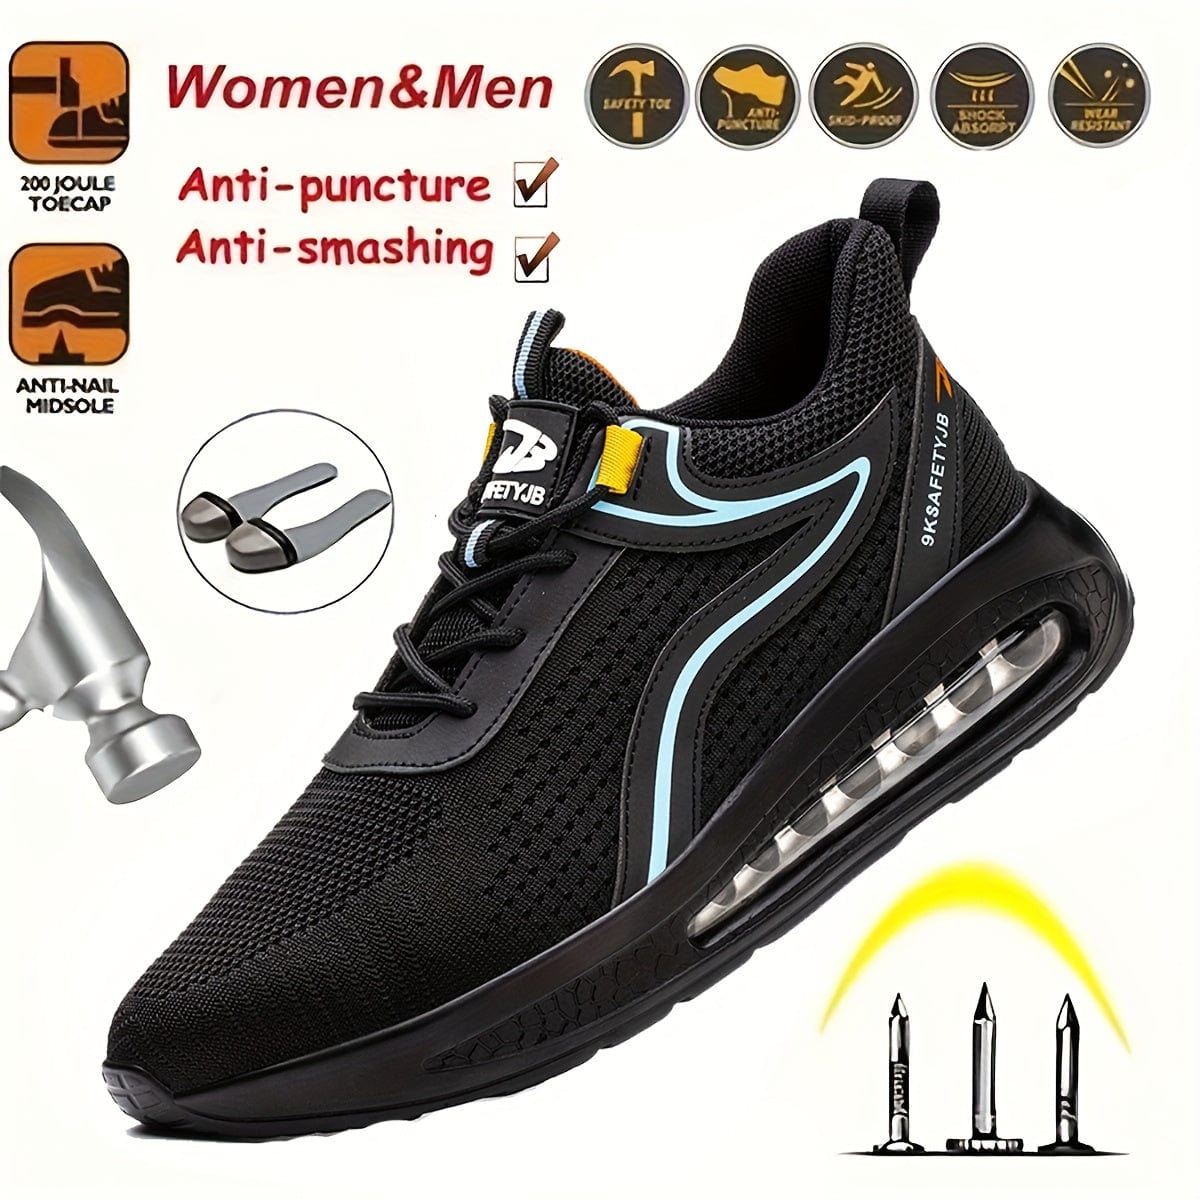 Plus Size Men's Protective Steel Toe Shoes With Air Cushion, Lace Up Comfy Sneakers, Perfect For Constructional Safety Workout Activities